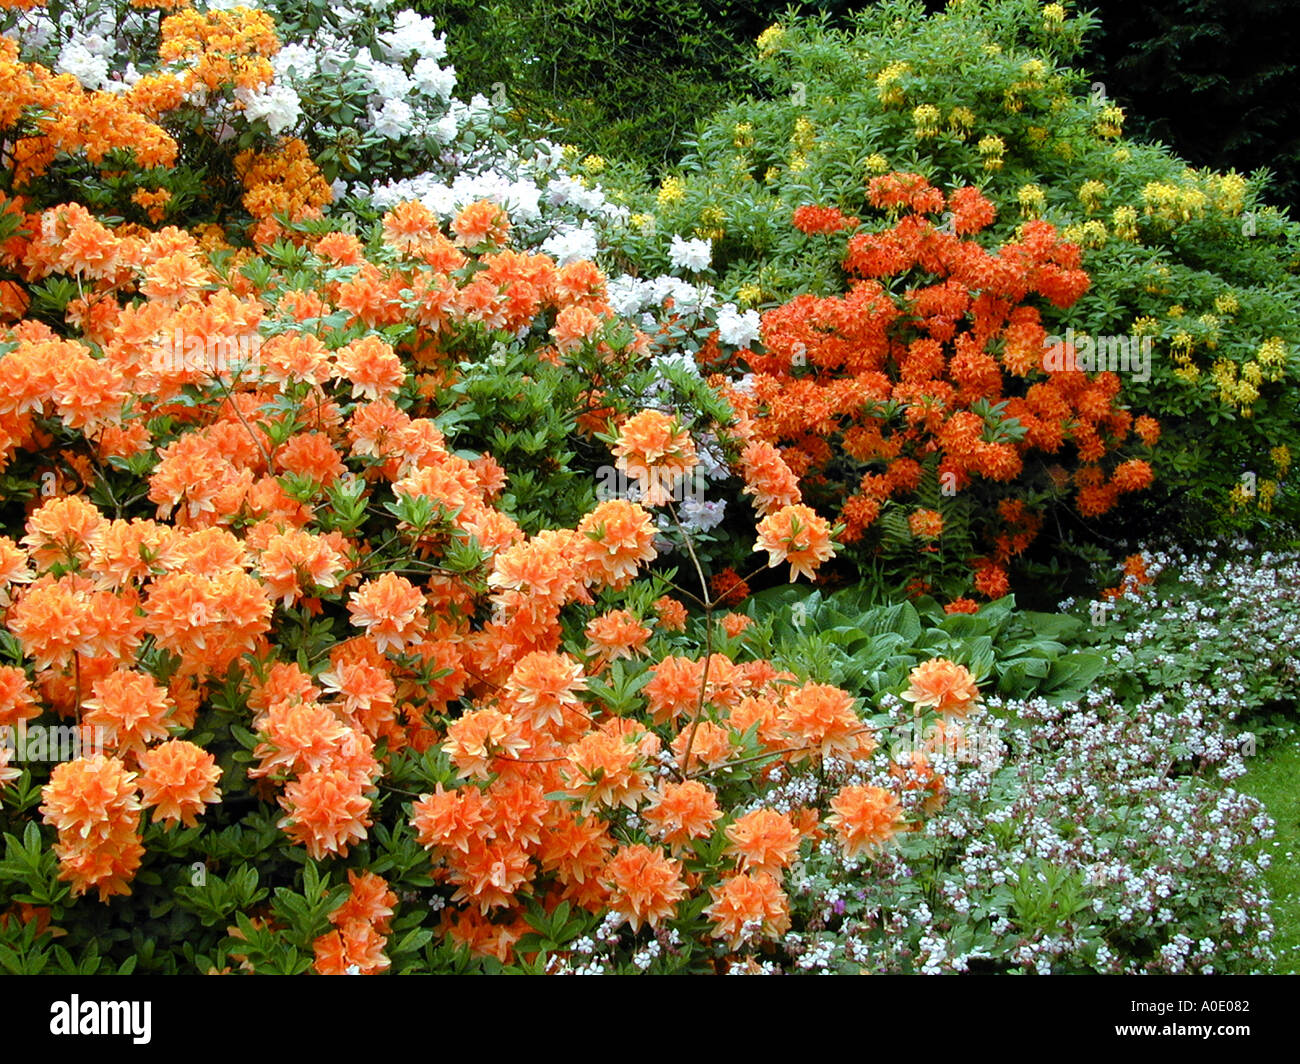 garden path view with azaleas rhododendrons geraniums Stock Photo